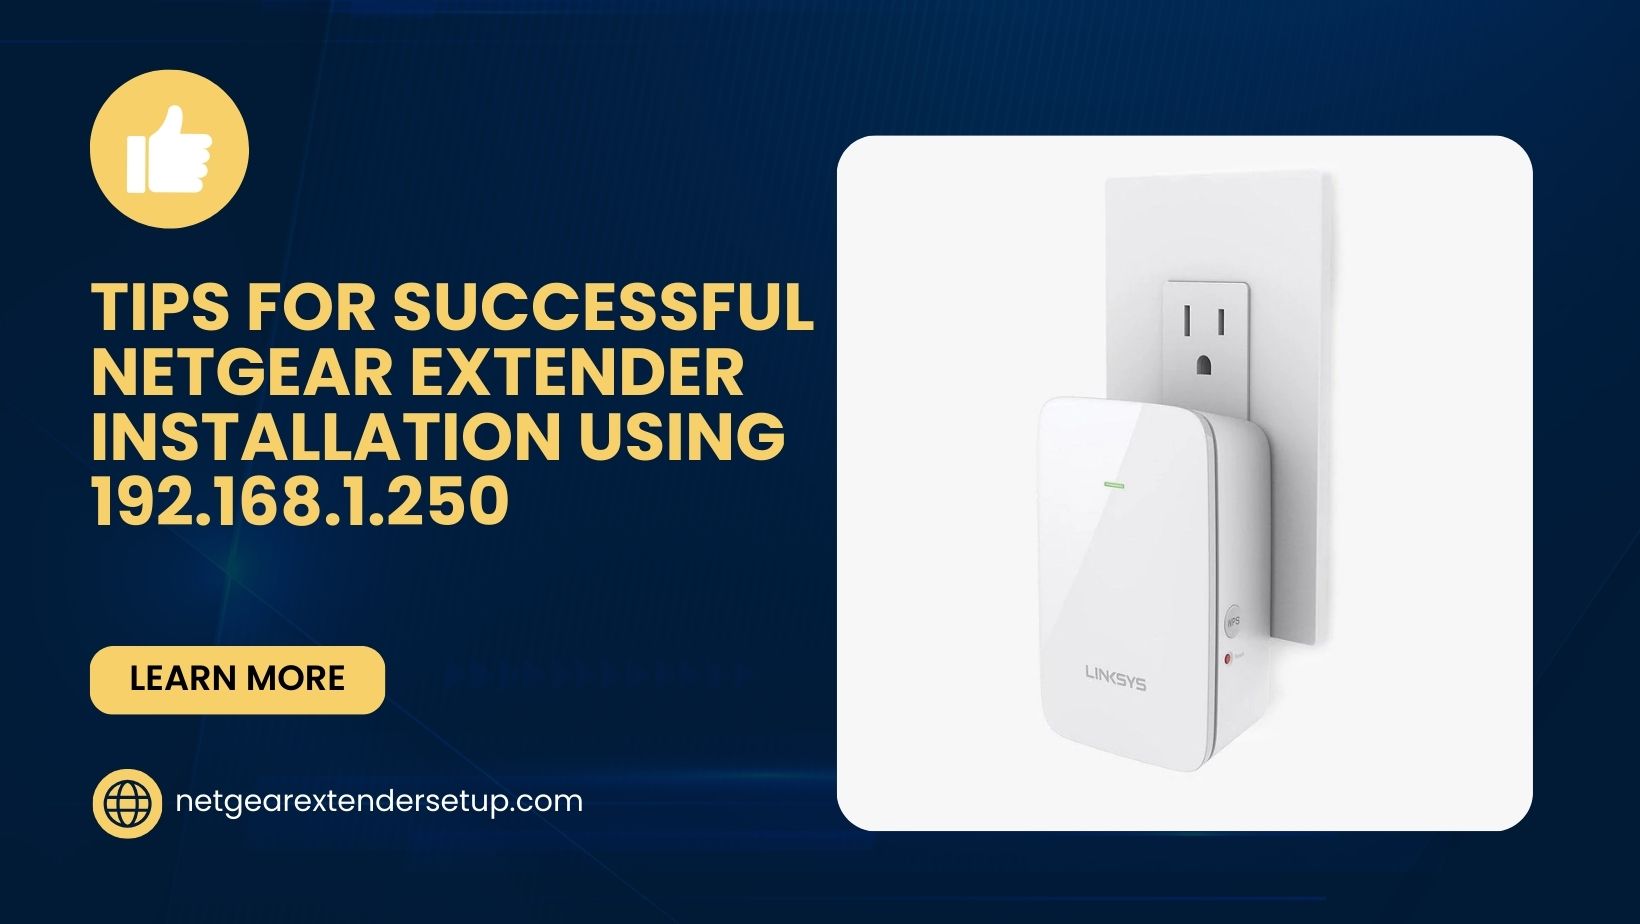 You are currently viewing Tips for Successful Netgear Extender Installation Using 192.168.1.250